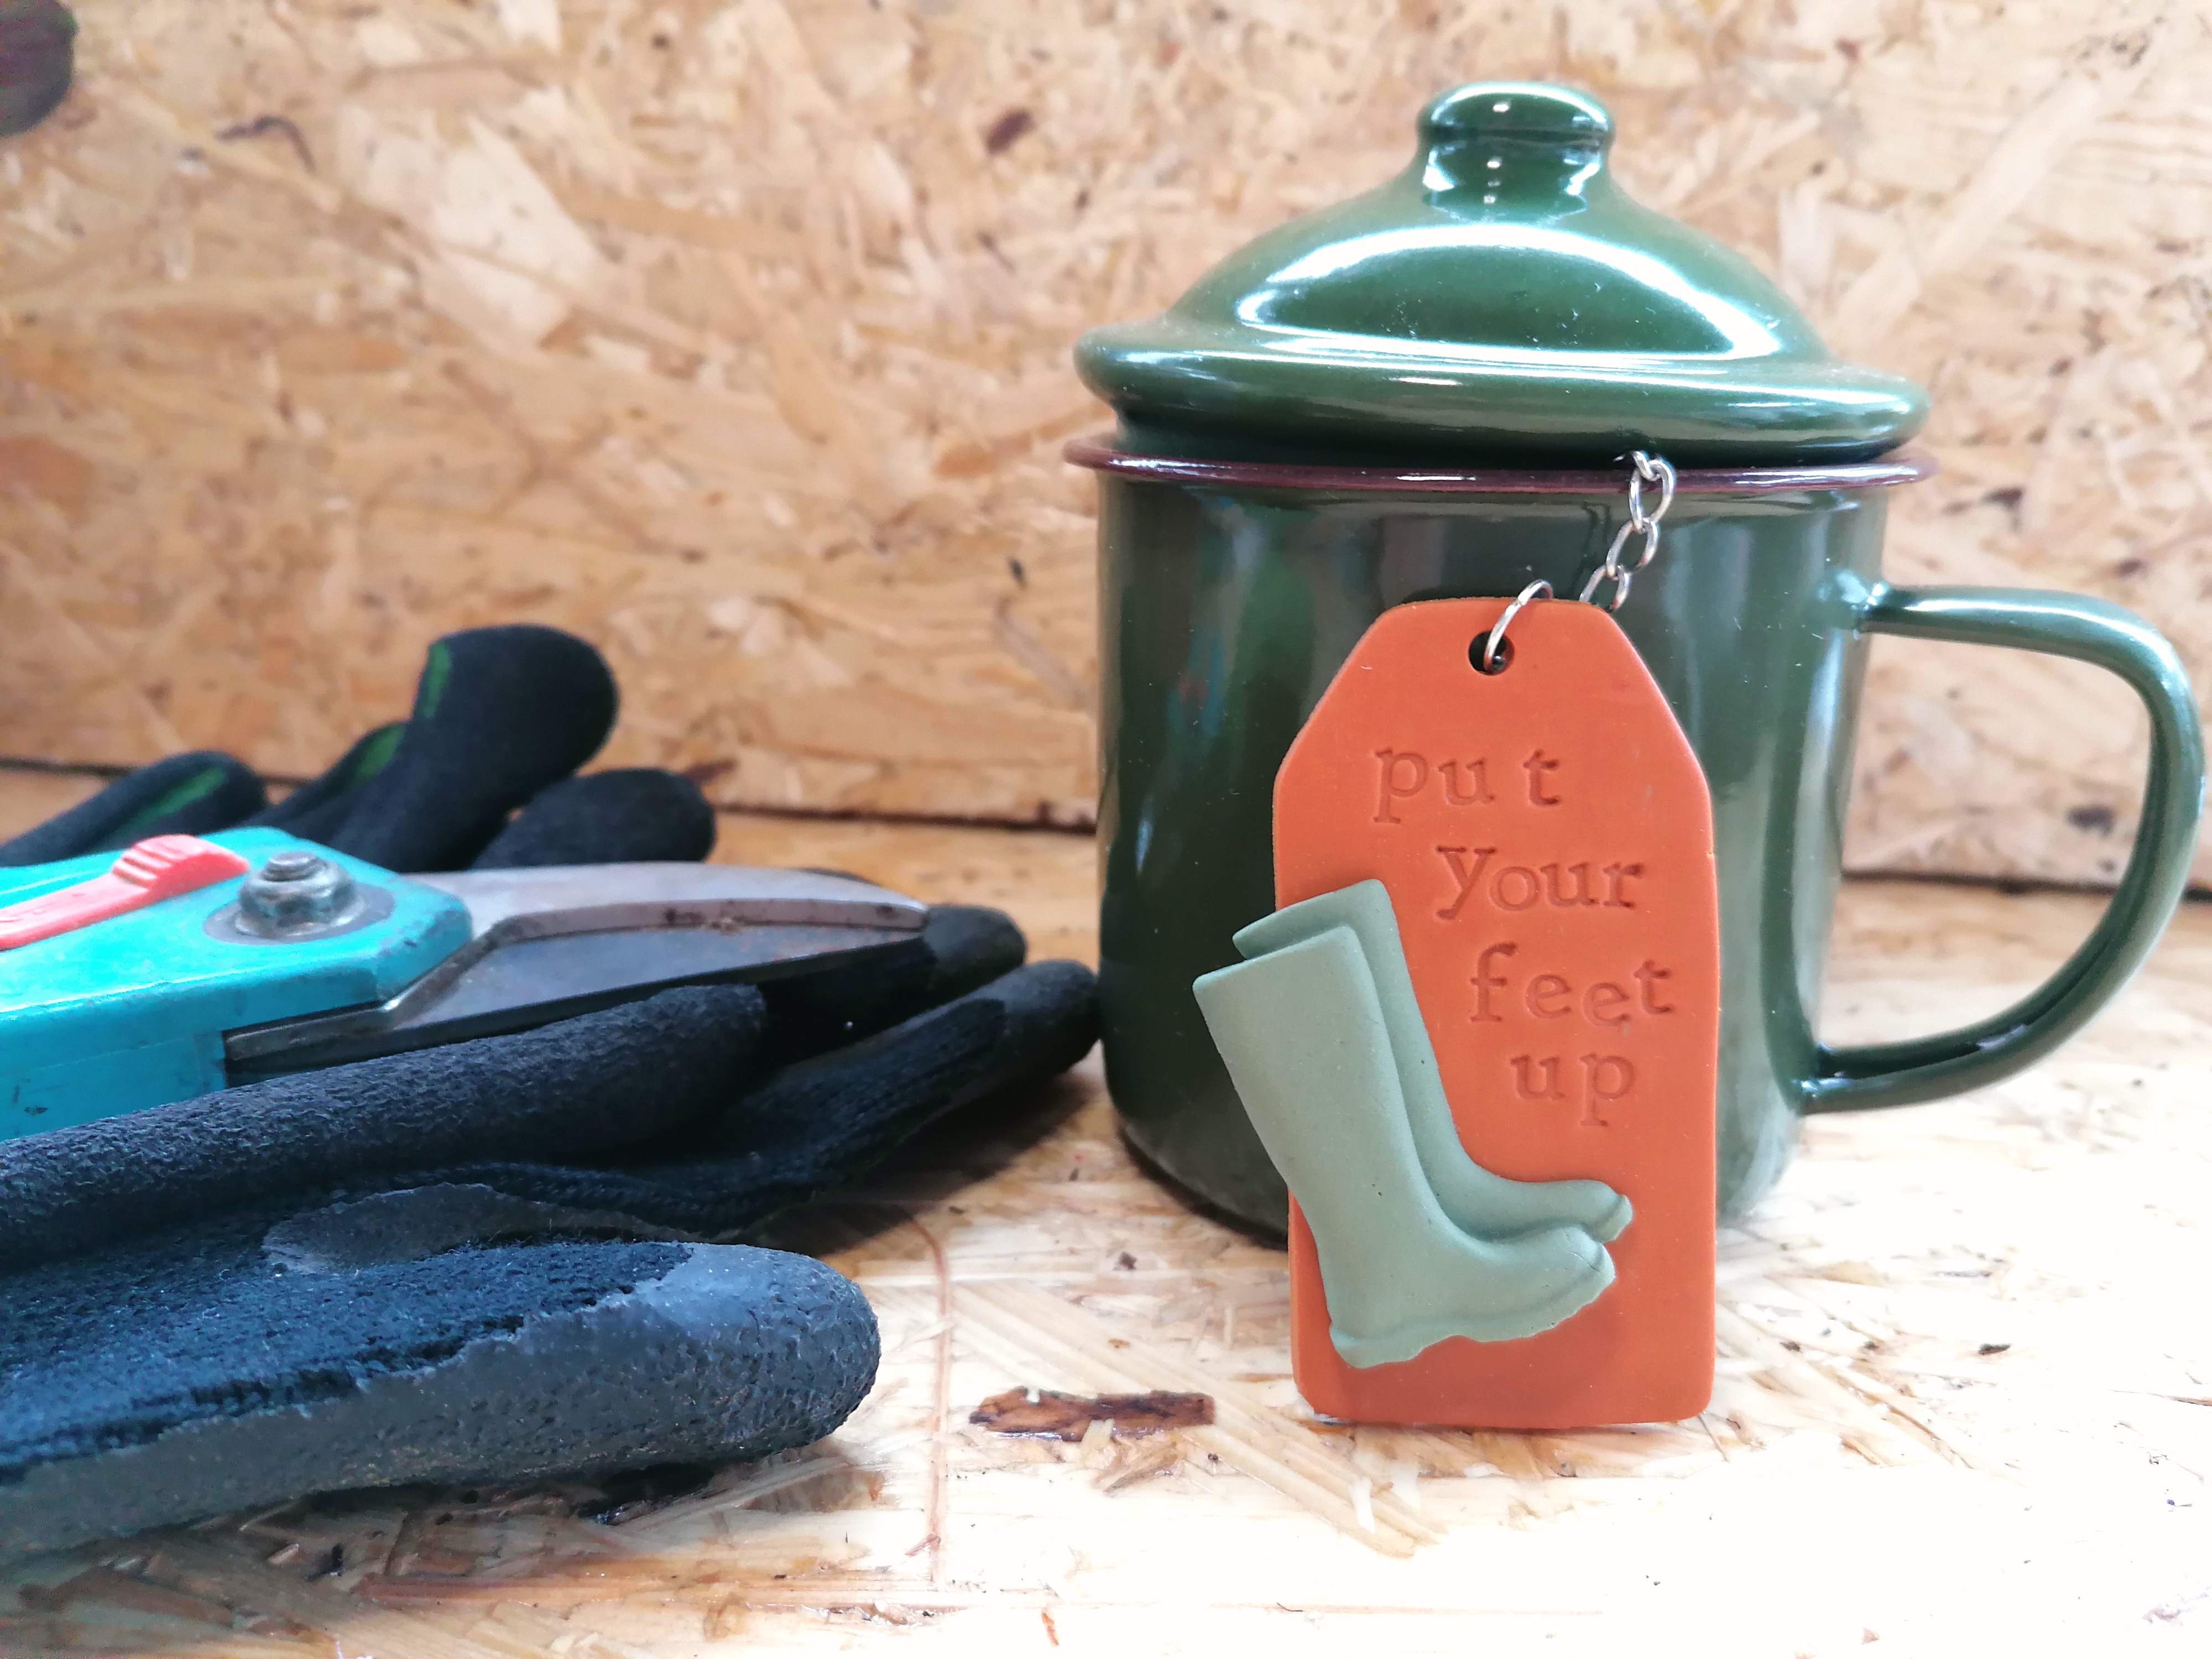 New! Put Your Feet Up Tea Infuser